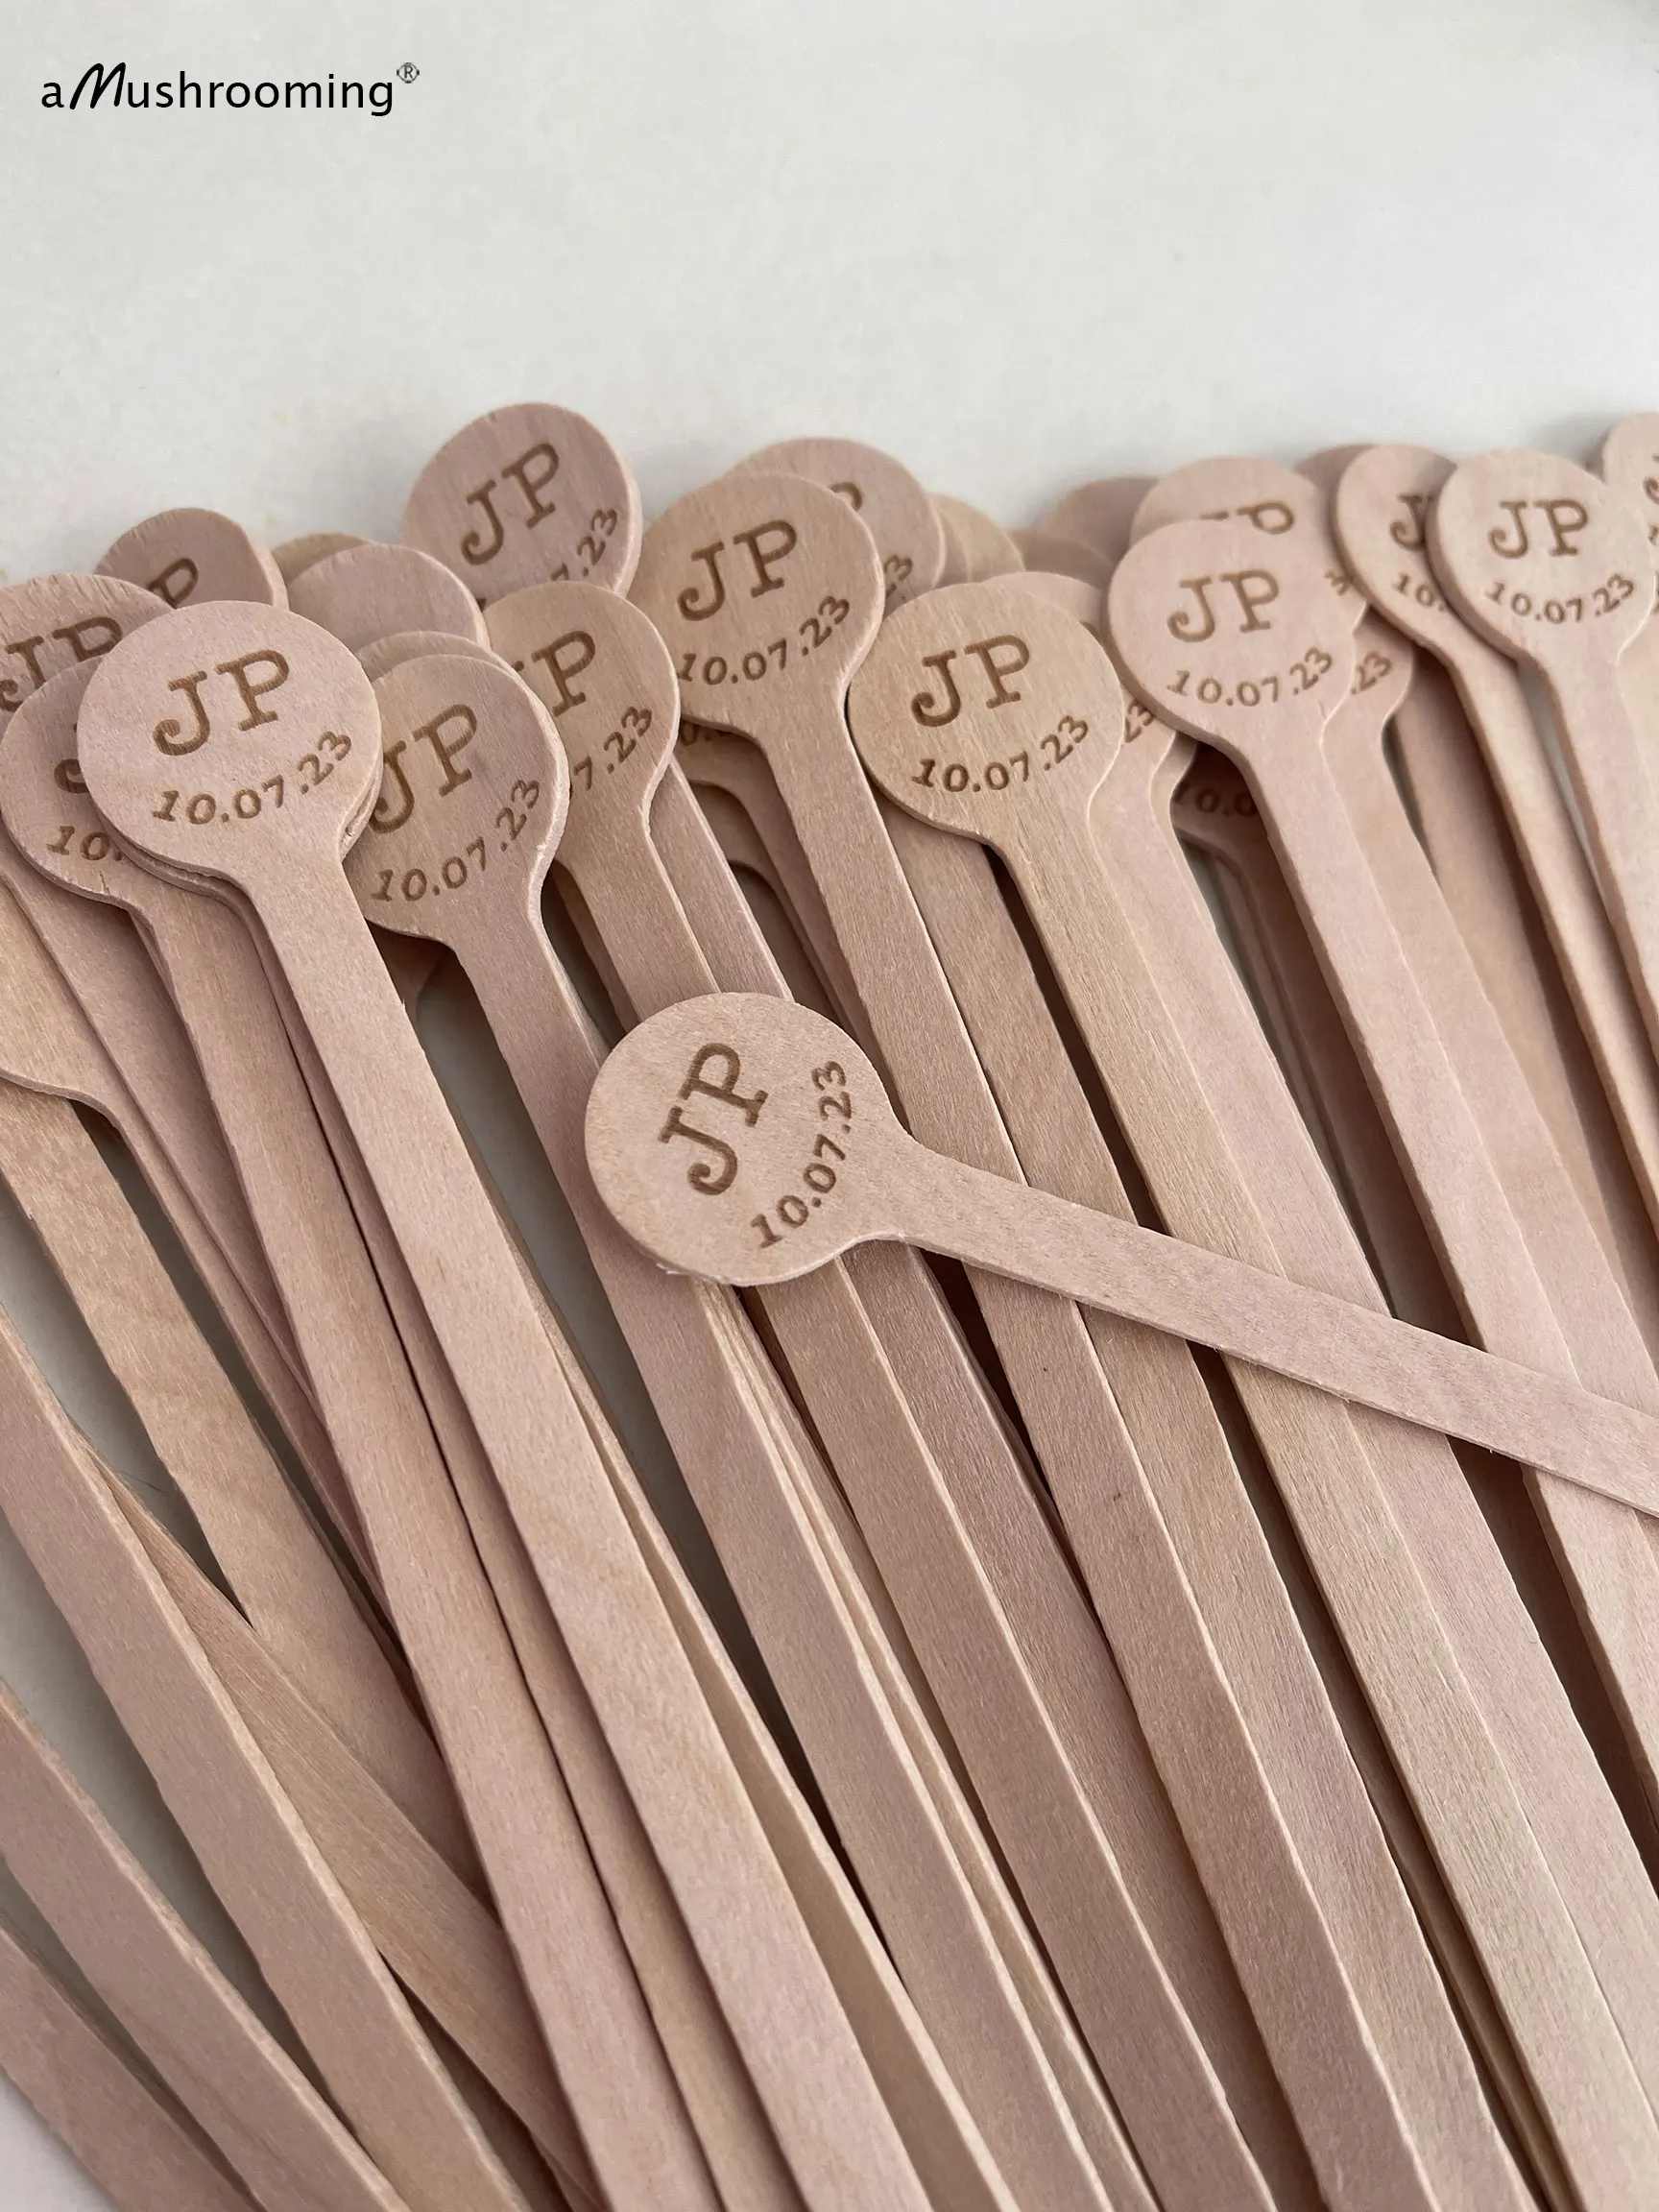 https://ae01.alicdn.com/kf/S9cf735c0ad414e1bb18329a3073f683cy/100pcs-Wooden-Round-Stirrers-for-Wedding-Party-Bridal-Shower-Plain-Personalized-Initials-Date-Coffee-Cocktail-Swizzle.jpg